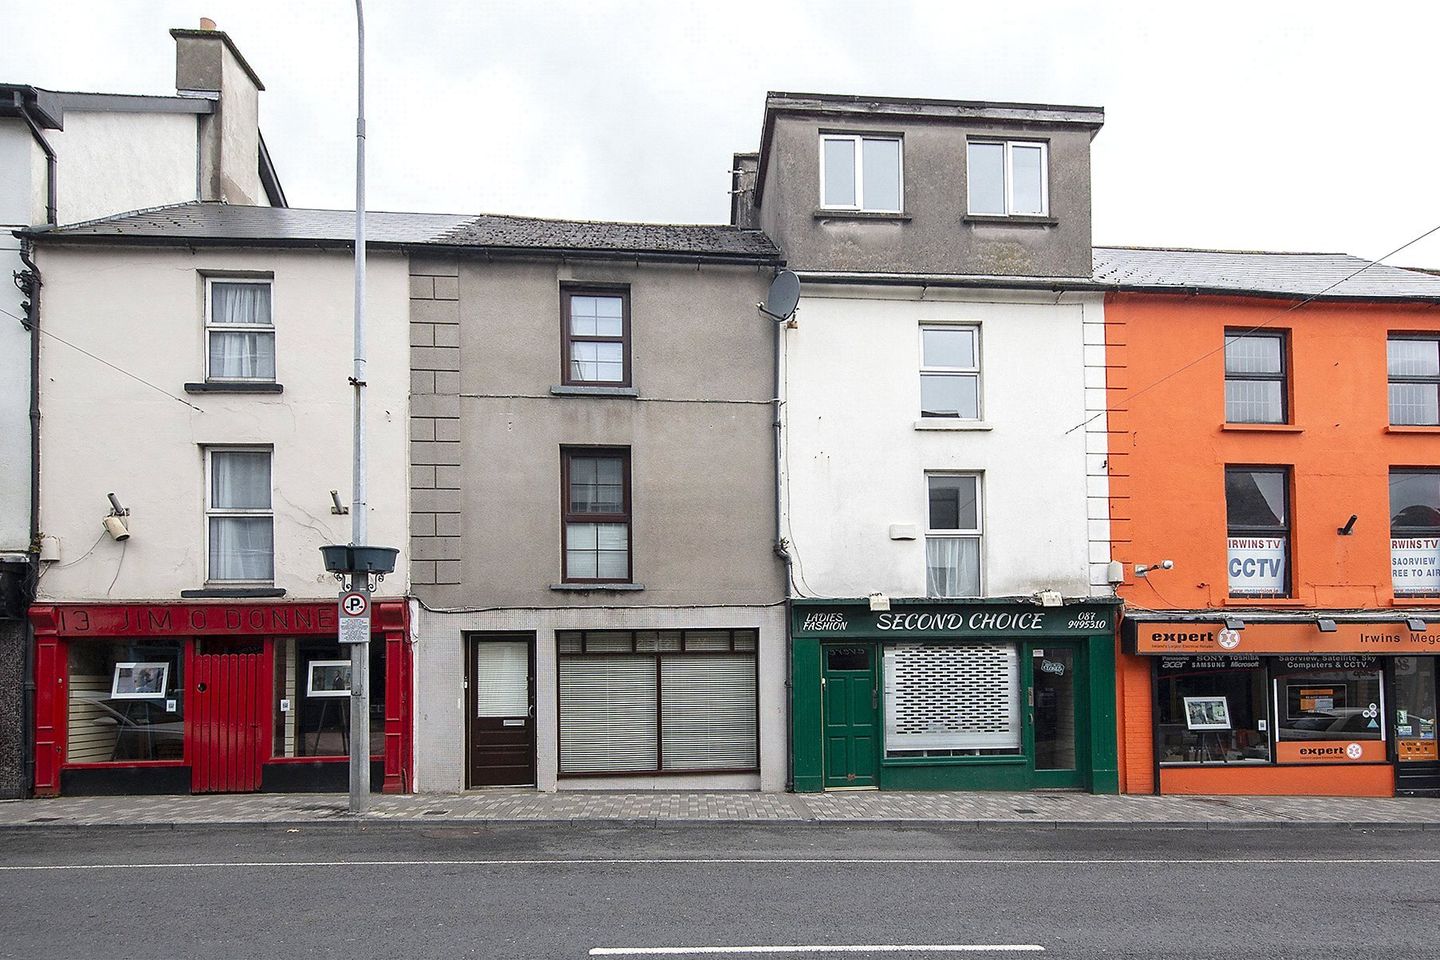 12 Mary Street, Dungarvan, Co Waterford, X35TV26